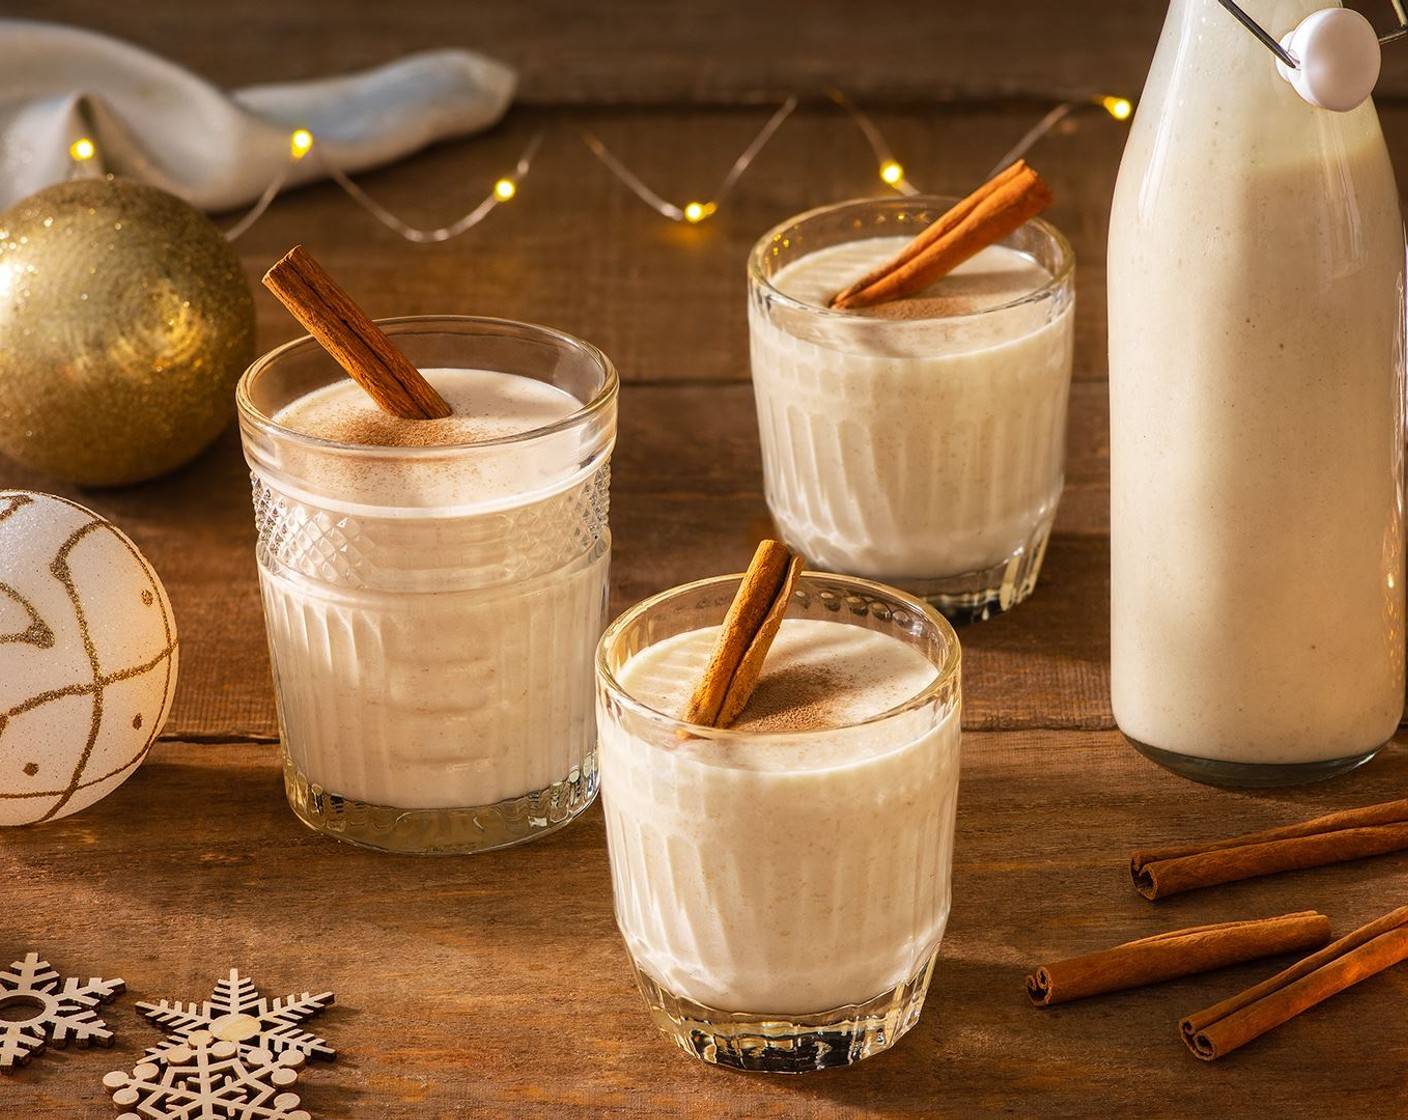 step 3 To serve, stir or shake bottle well to combine. Pour coquito into small serving glasses. Garnish with ground cinnamon and Cinnamon Sticks (to taste), if desired.